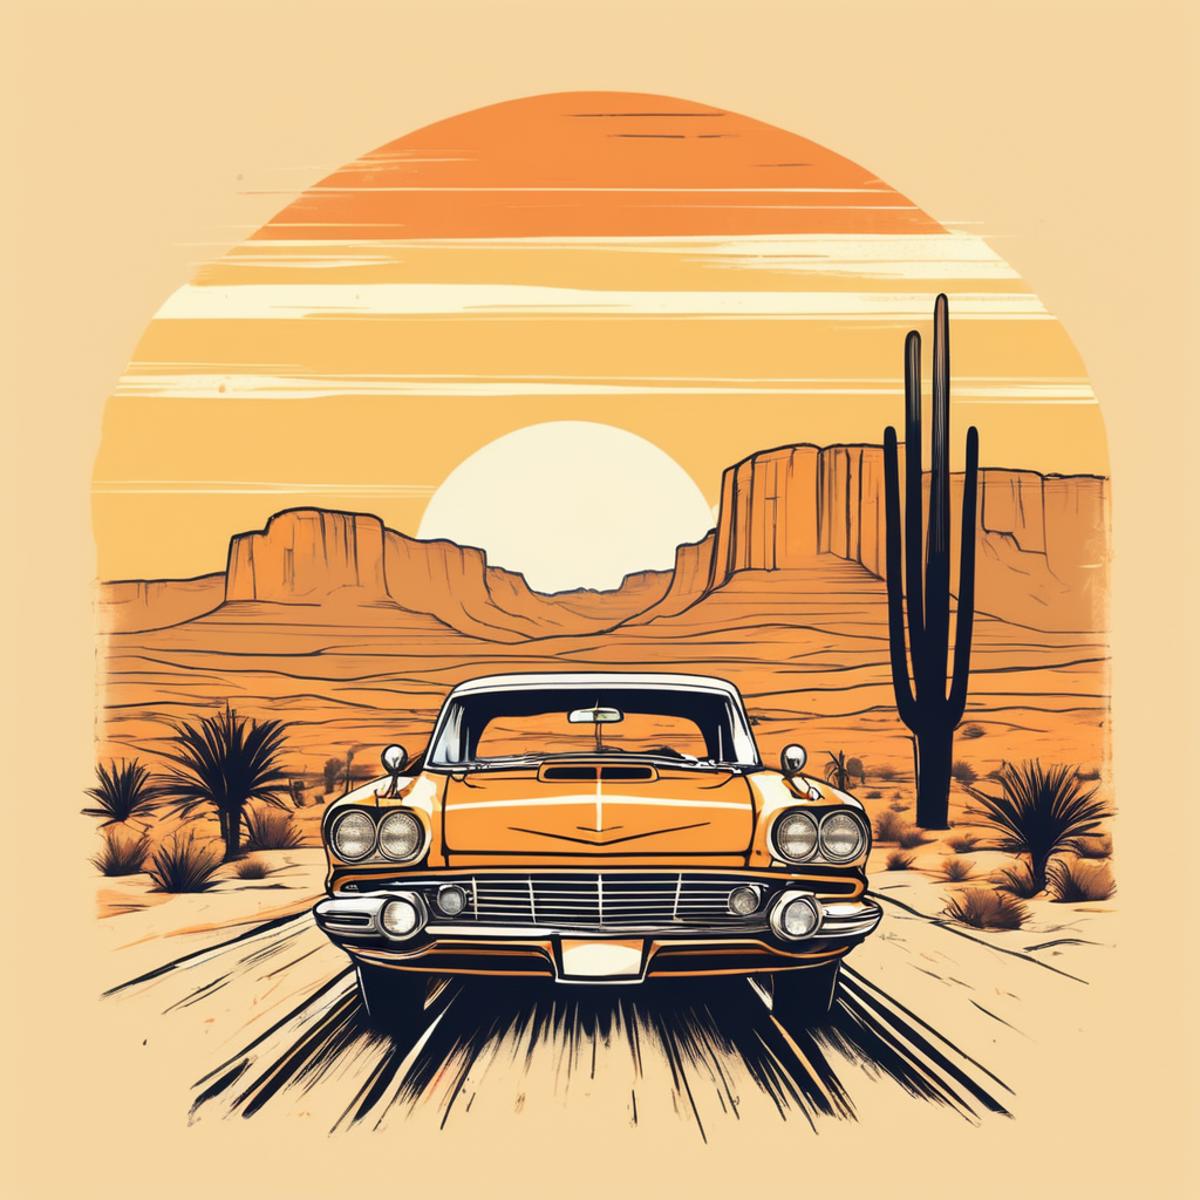 A vintage car driving down a desert road at sunset.